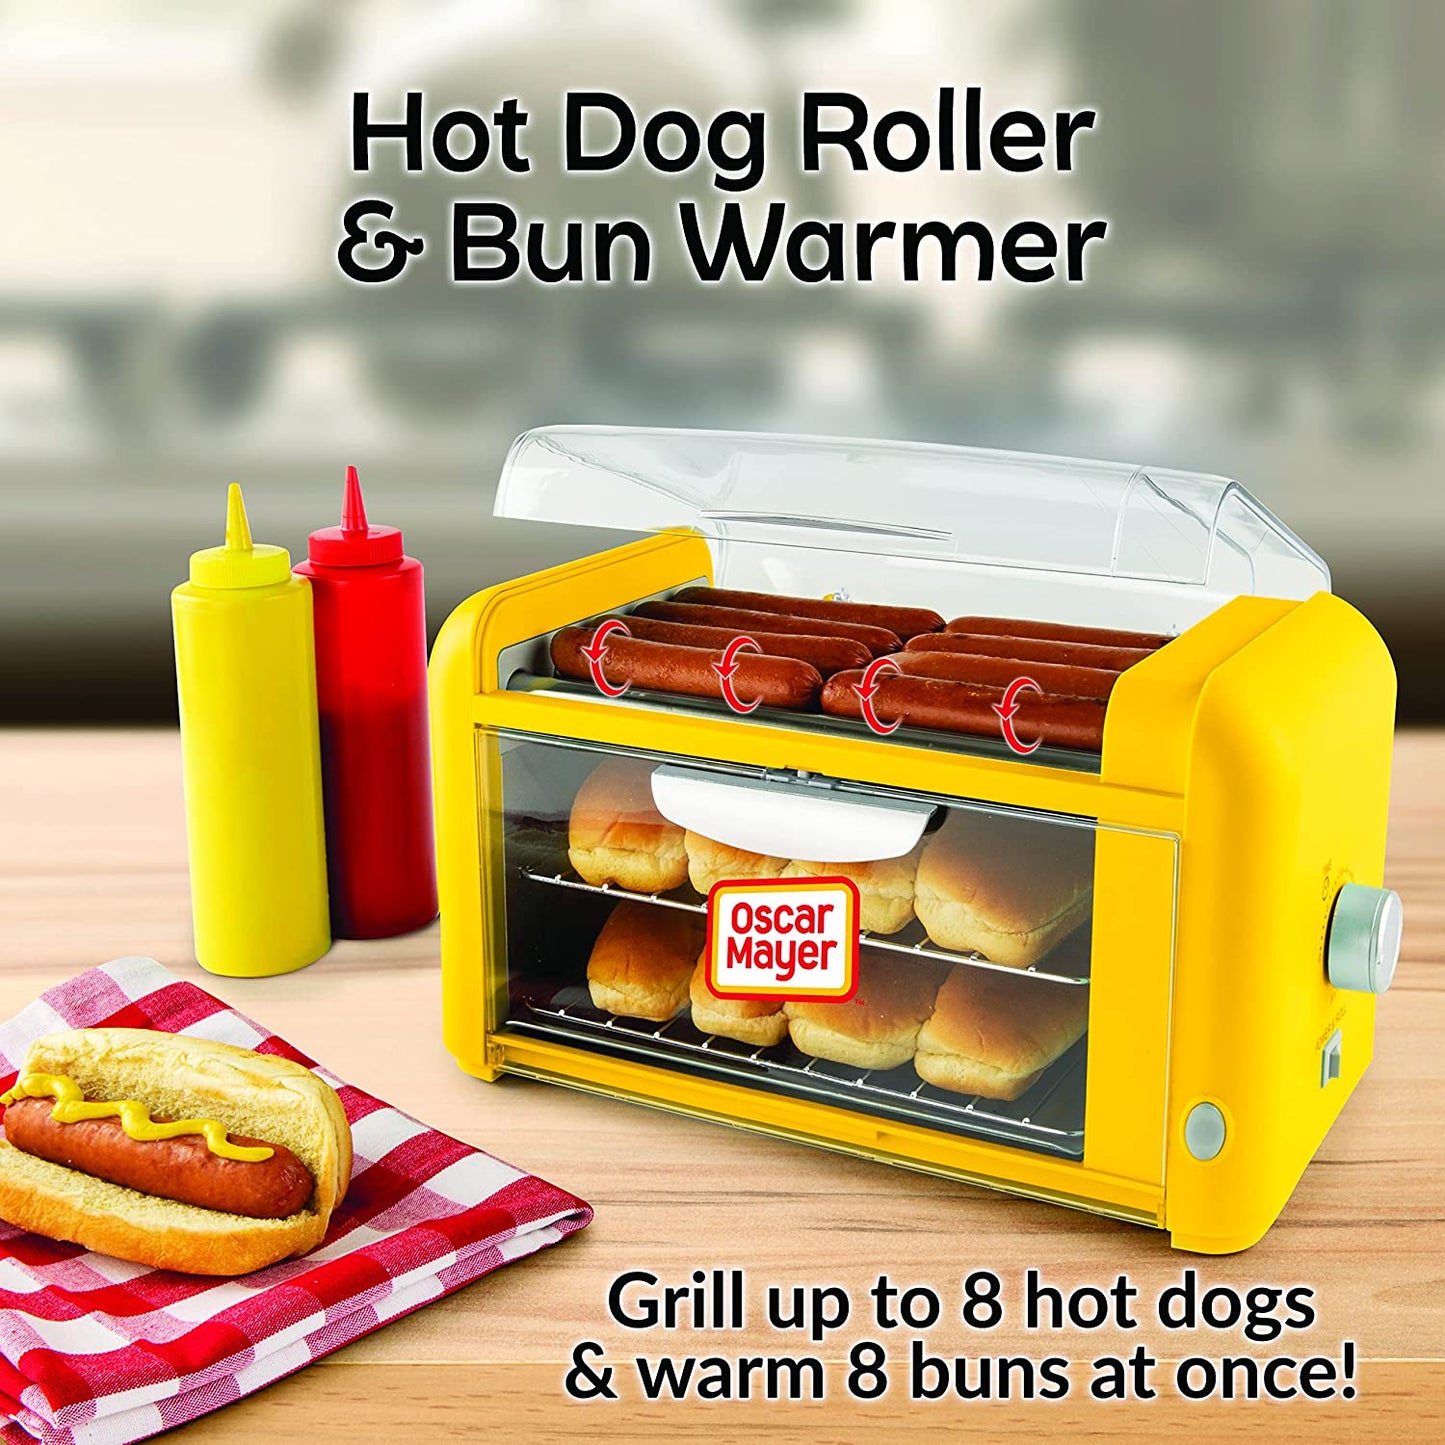 A hot dog roller and bun warmer filled with food. Near by are two bottles of sauce and a cooked hot dog ready to eat.